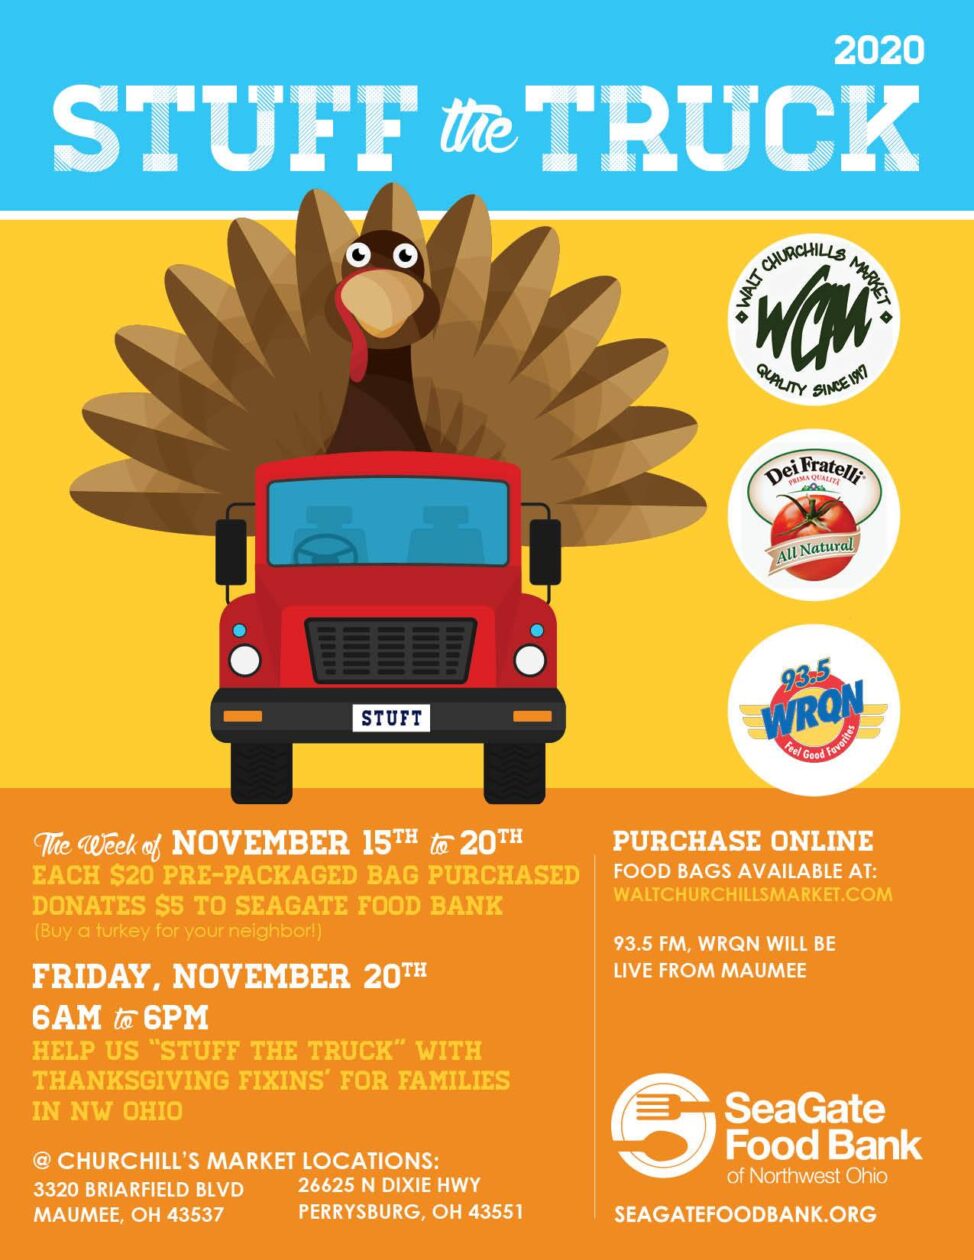 Stuff the Truck is less than 2 weeks away! We can't wait to see all your smiling faces t...